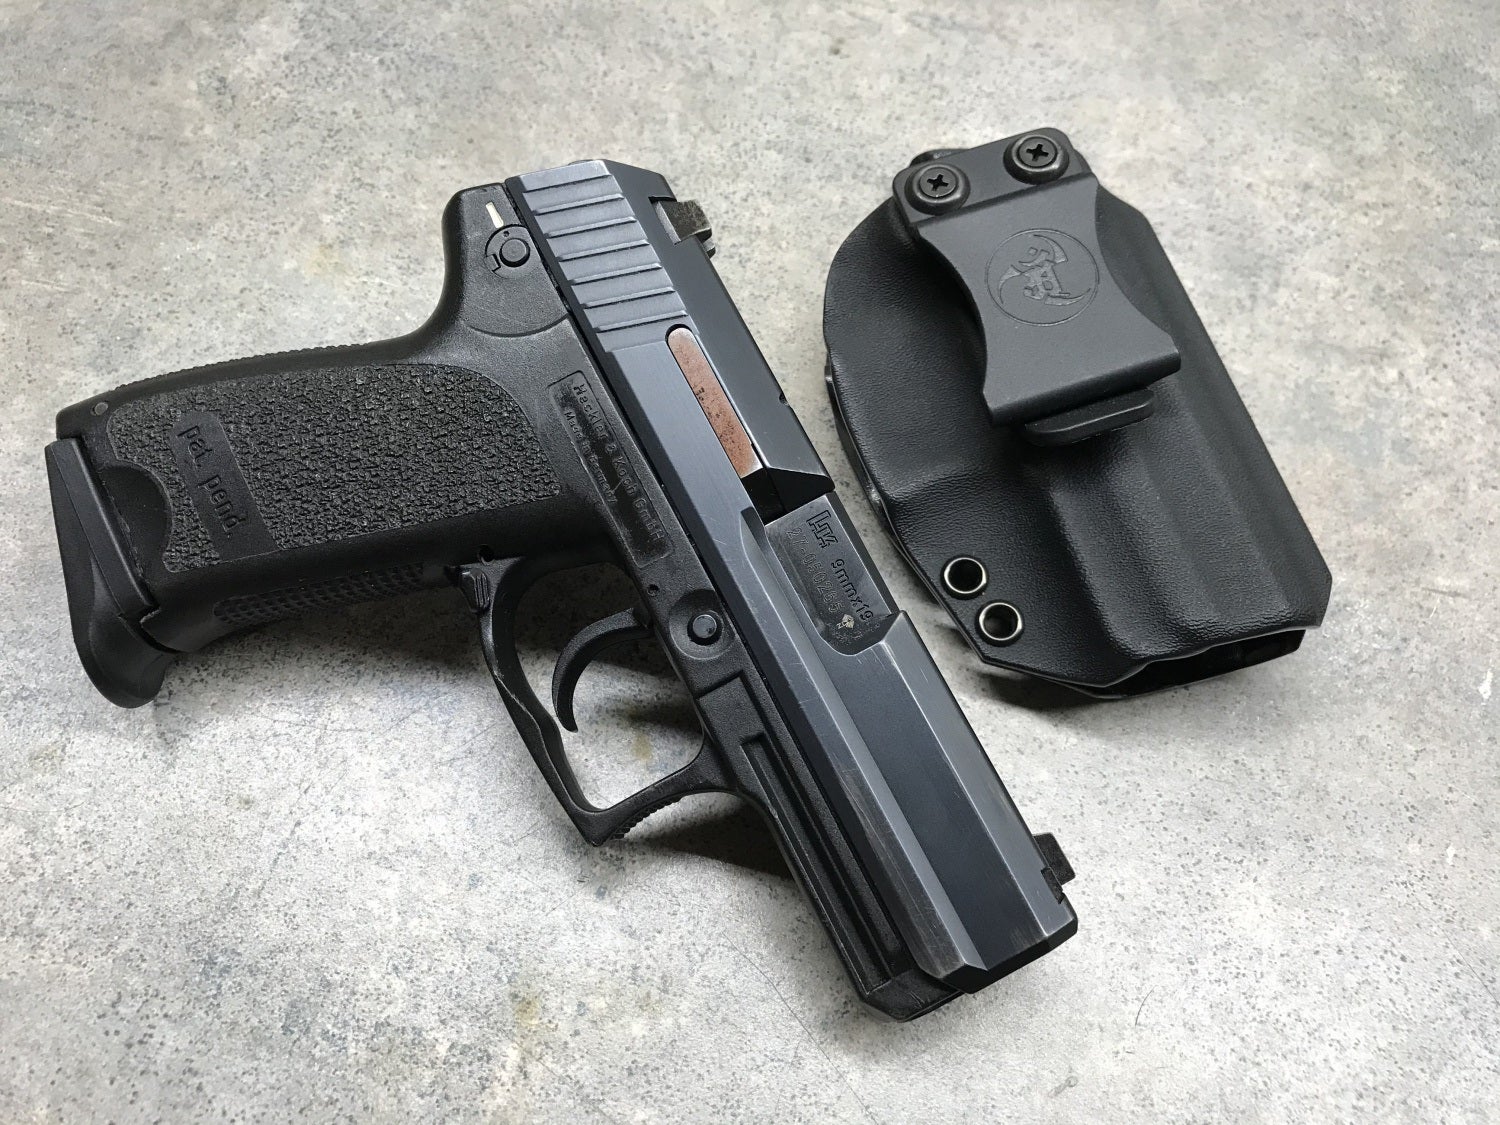 The HK USP Compact - How Is It After 15 Years Of Use?The Firearm Blog